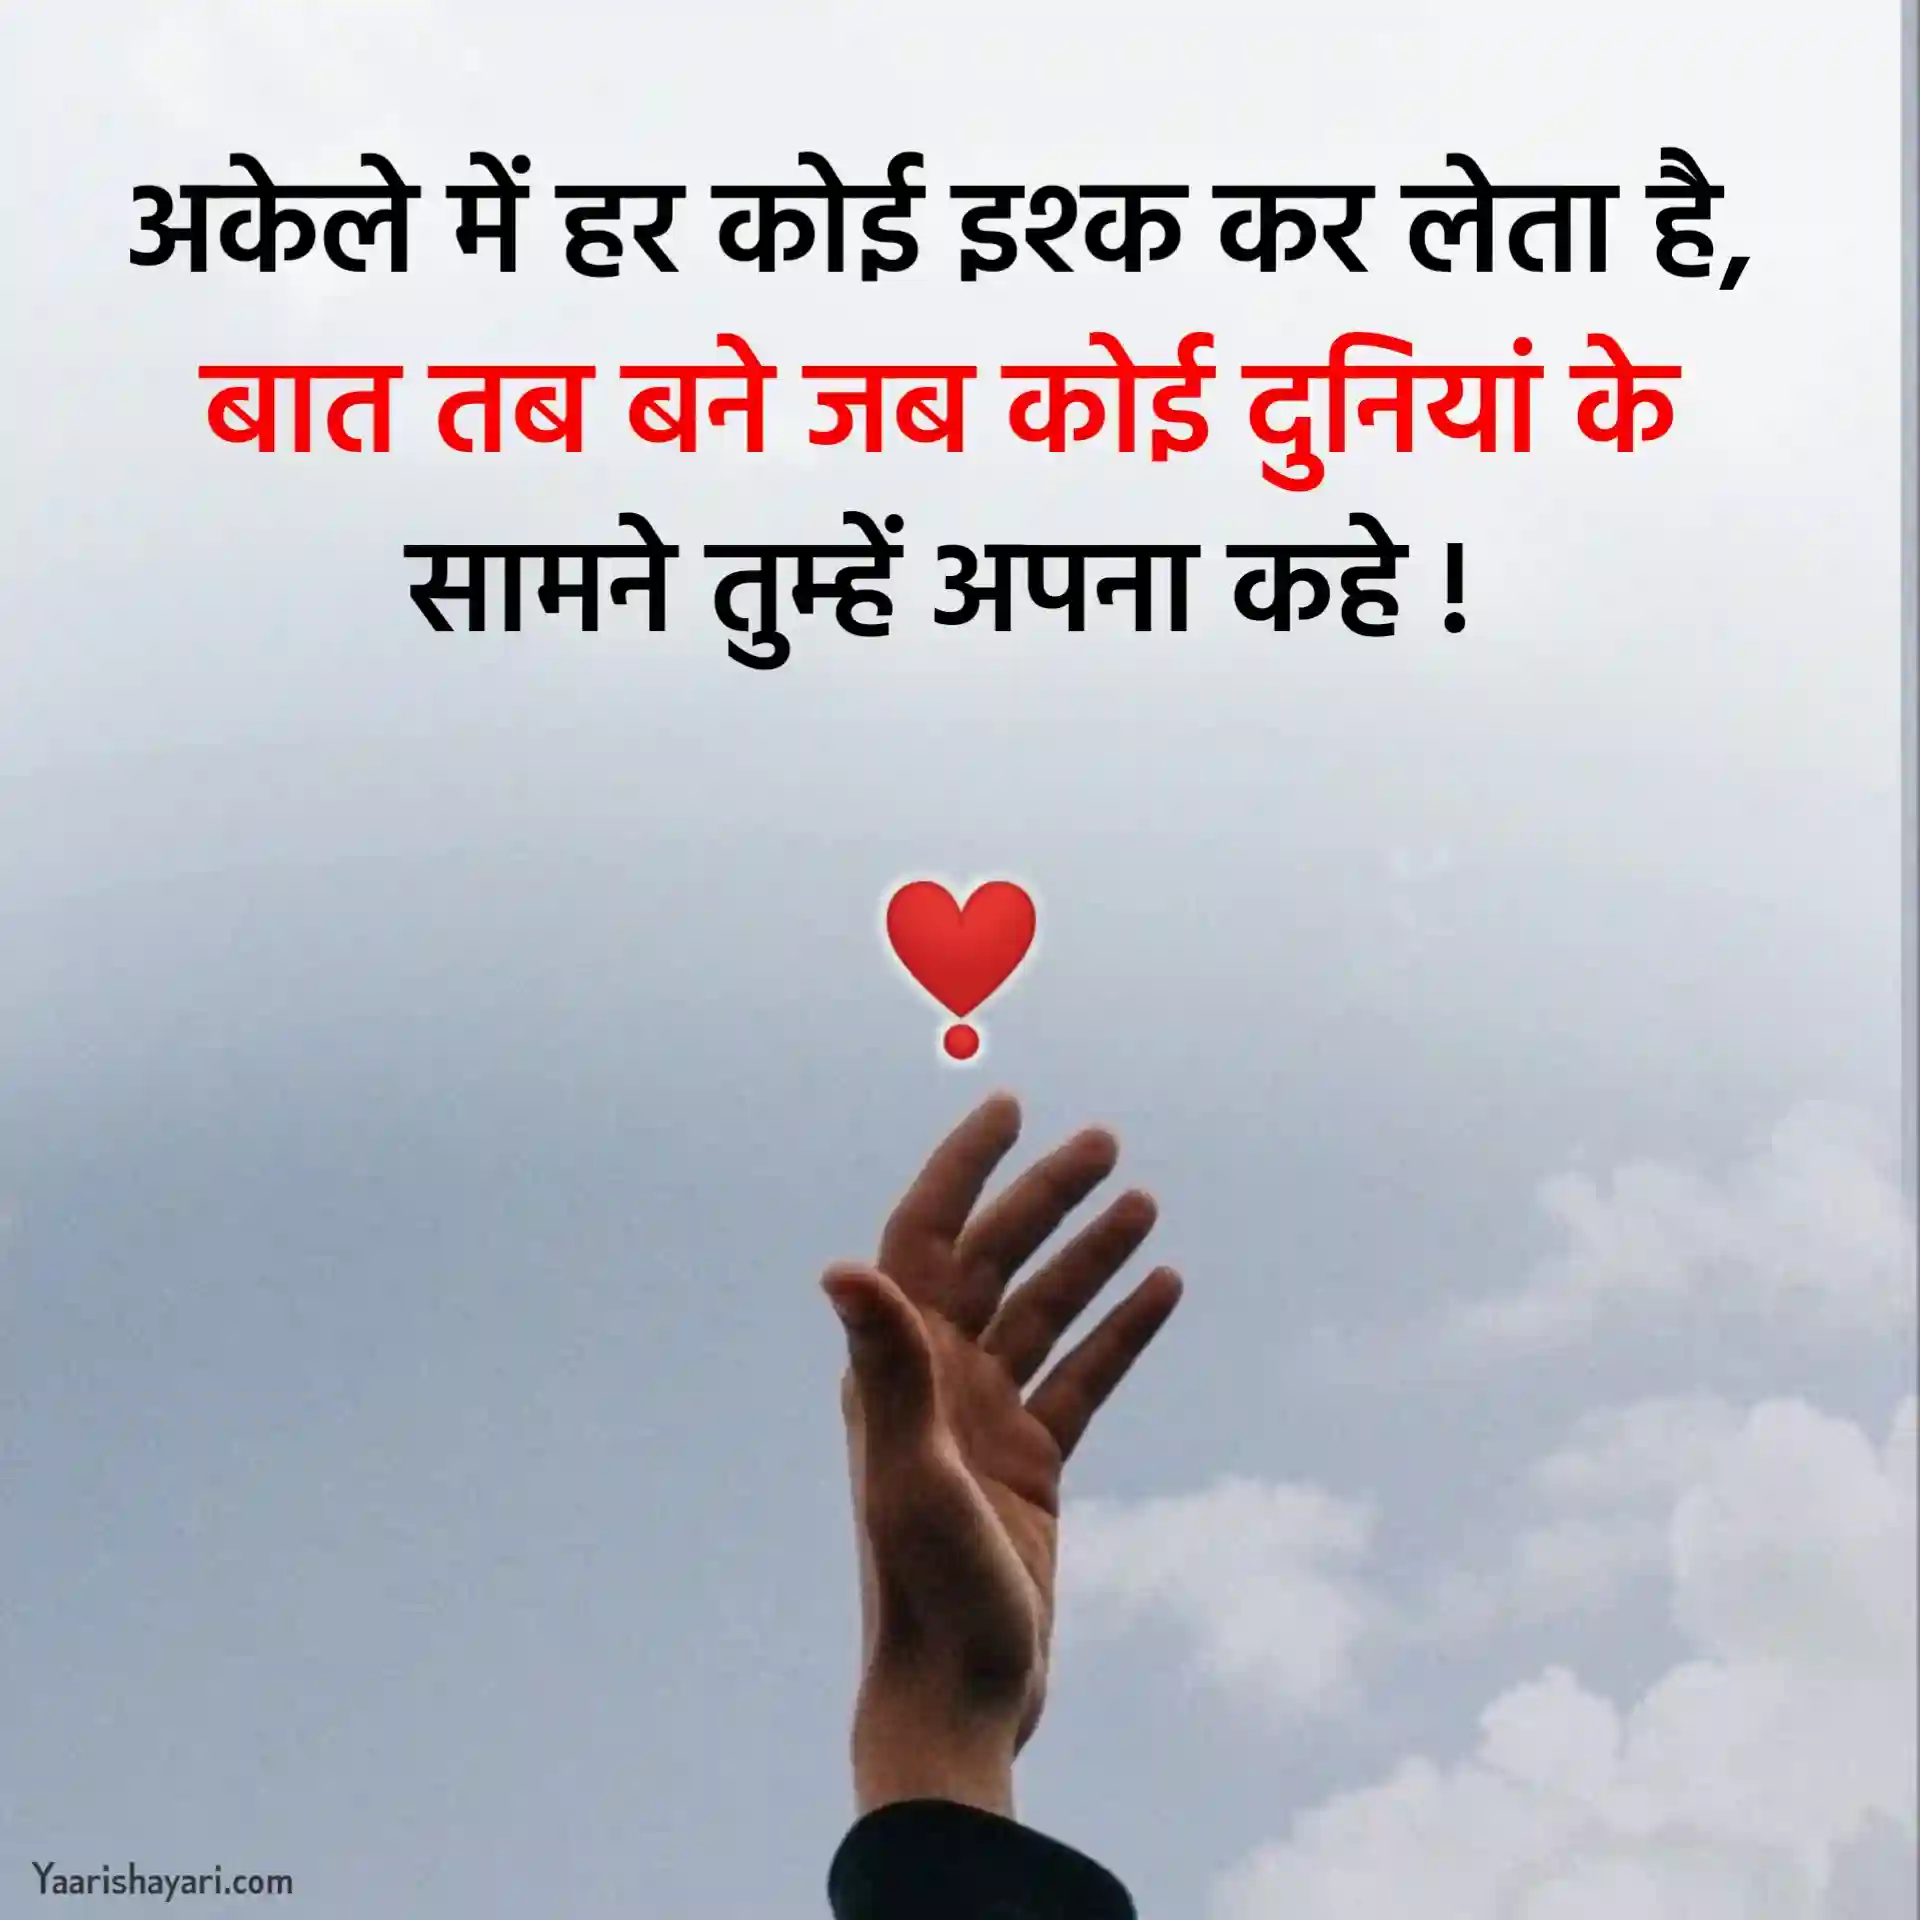 Quotes on Love in Hindi